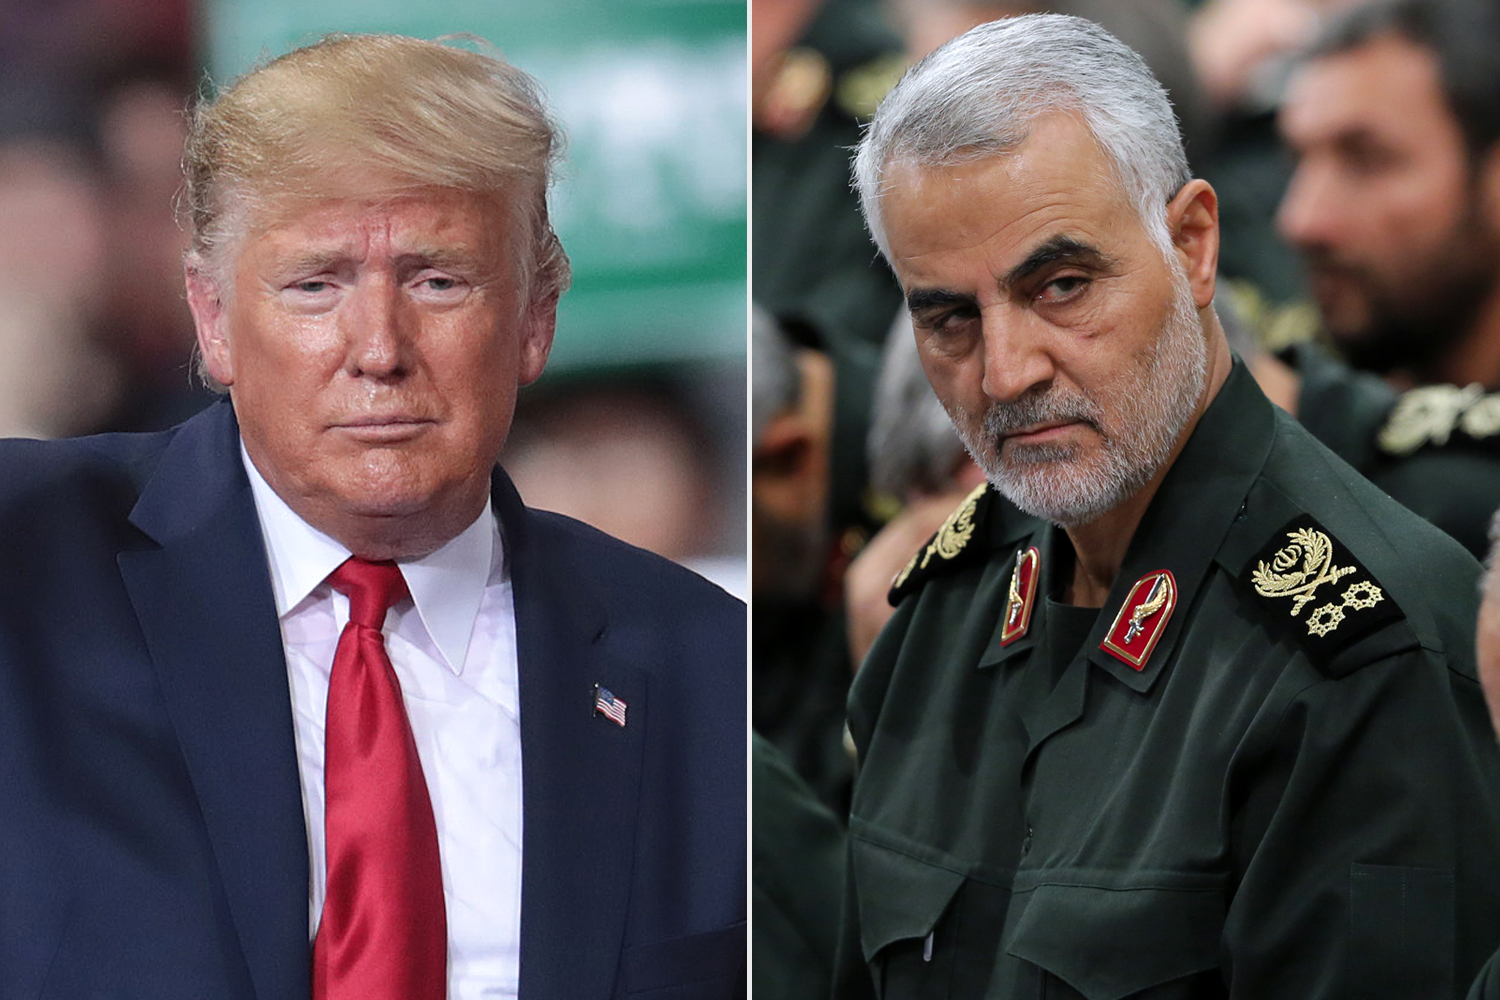 Instagram, the Facebook-owned photo-sharing app, has continued to delete accounts and posts on the Iranian Major General General Qasem Soleimani,